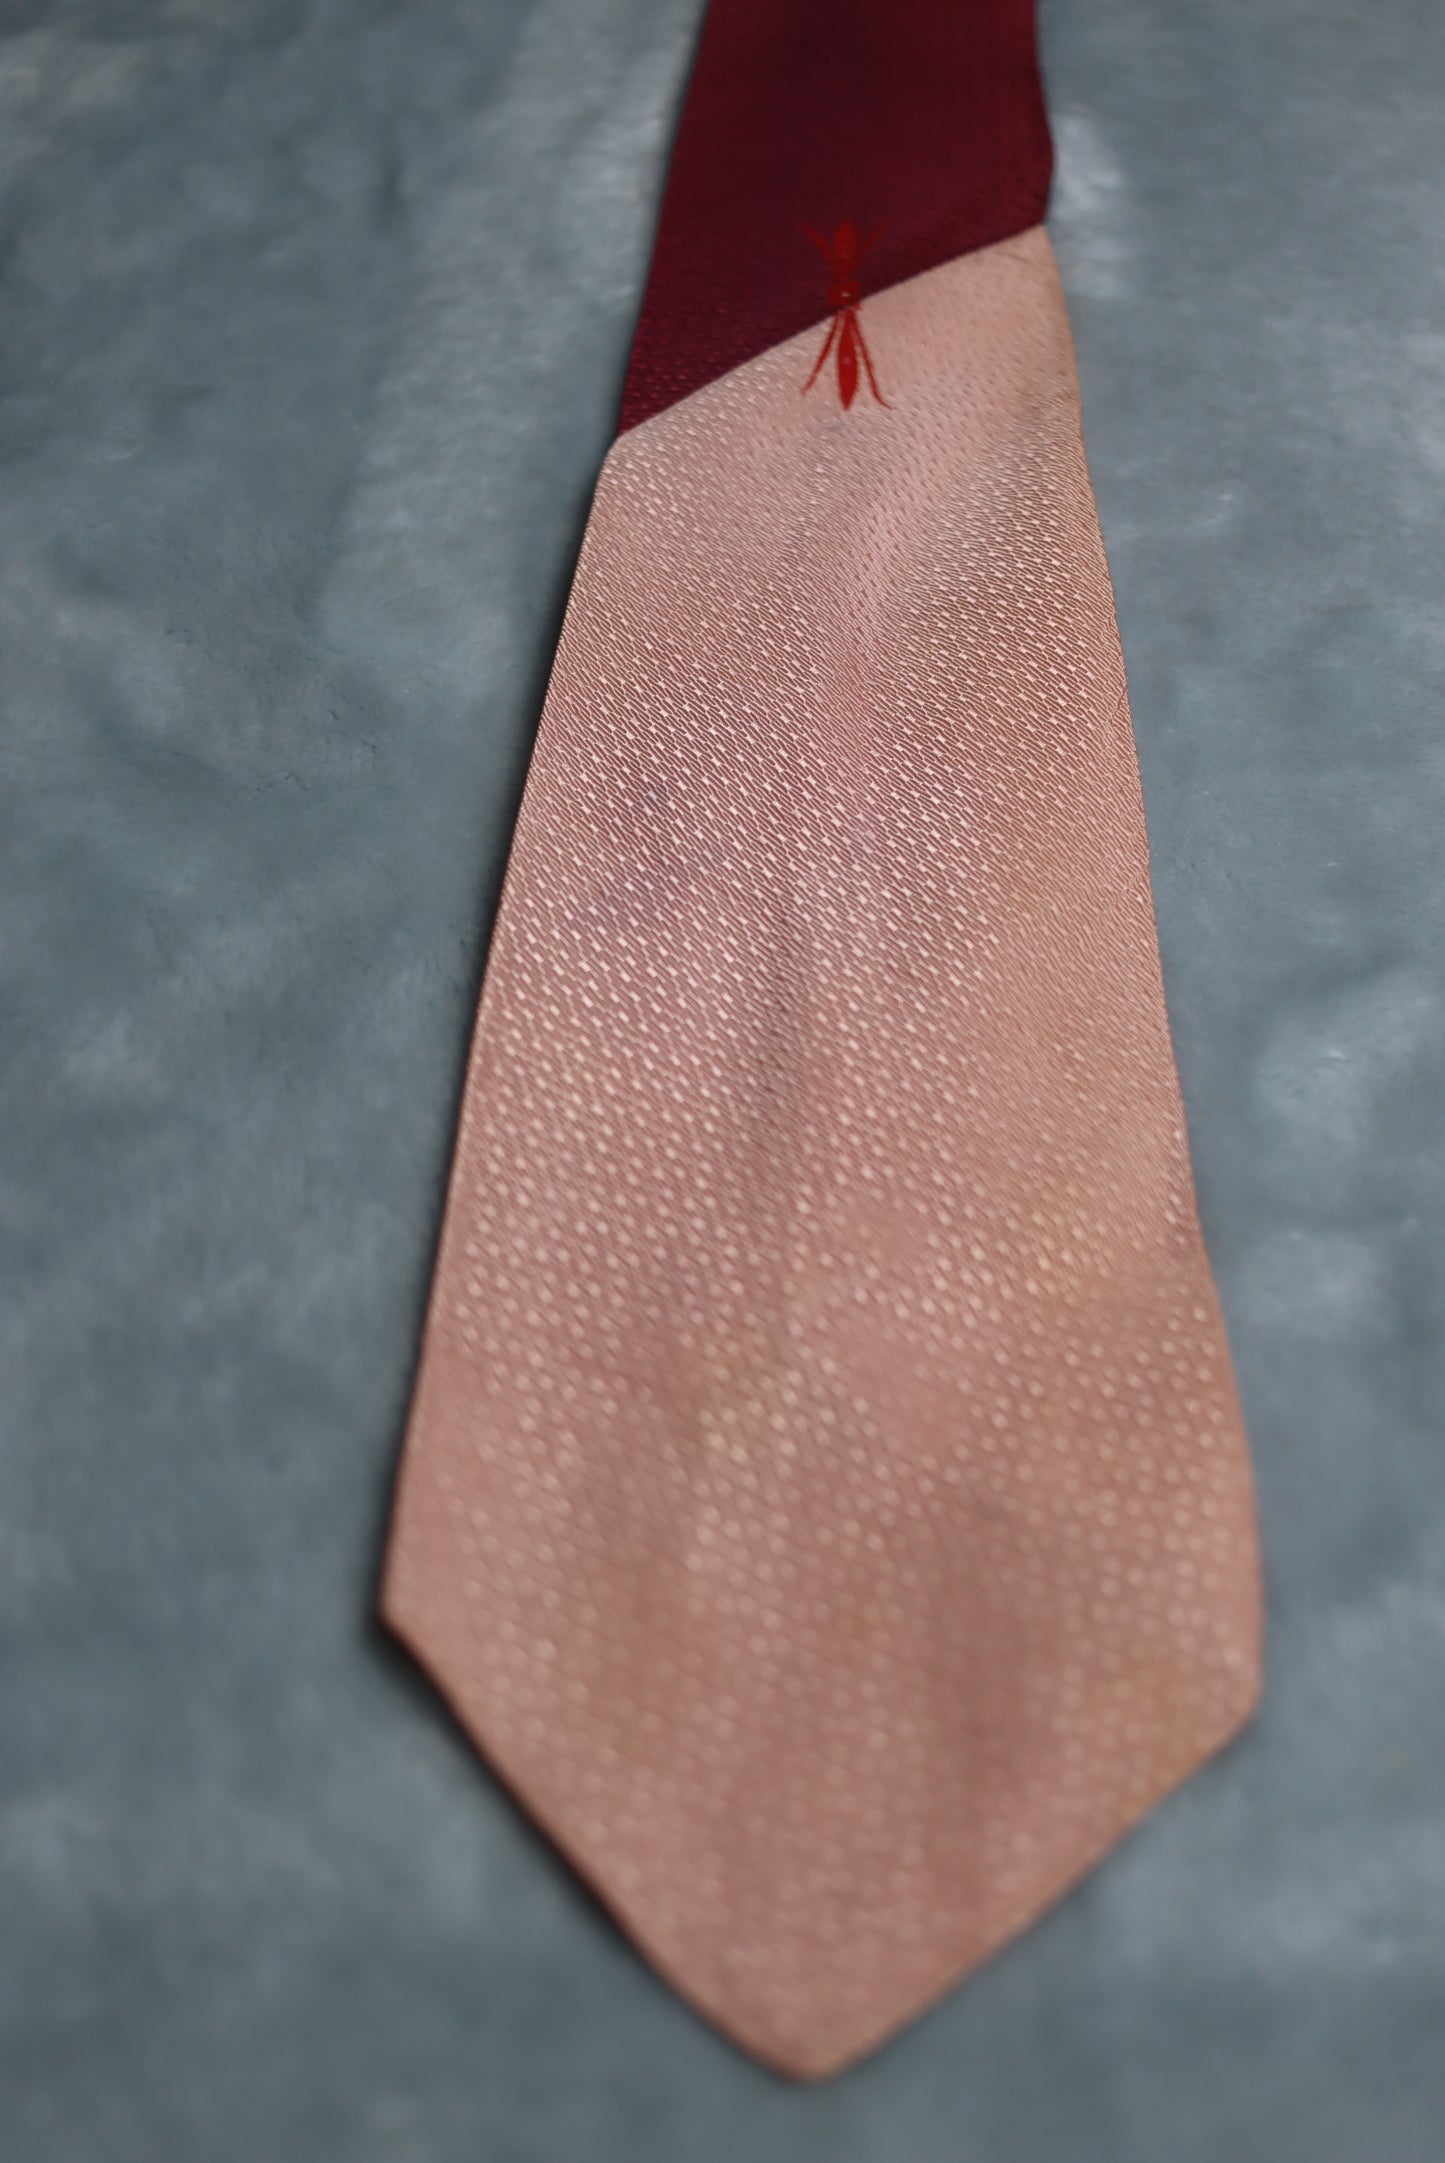 Vintage 1940s/50s Dusky and Dark Pink Haband Swing Tie